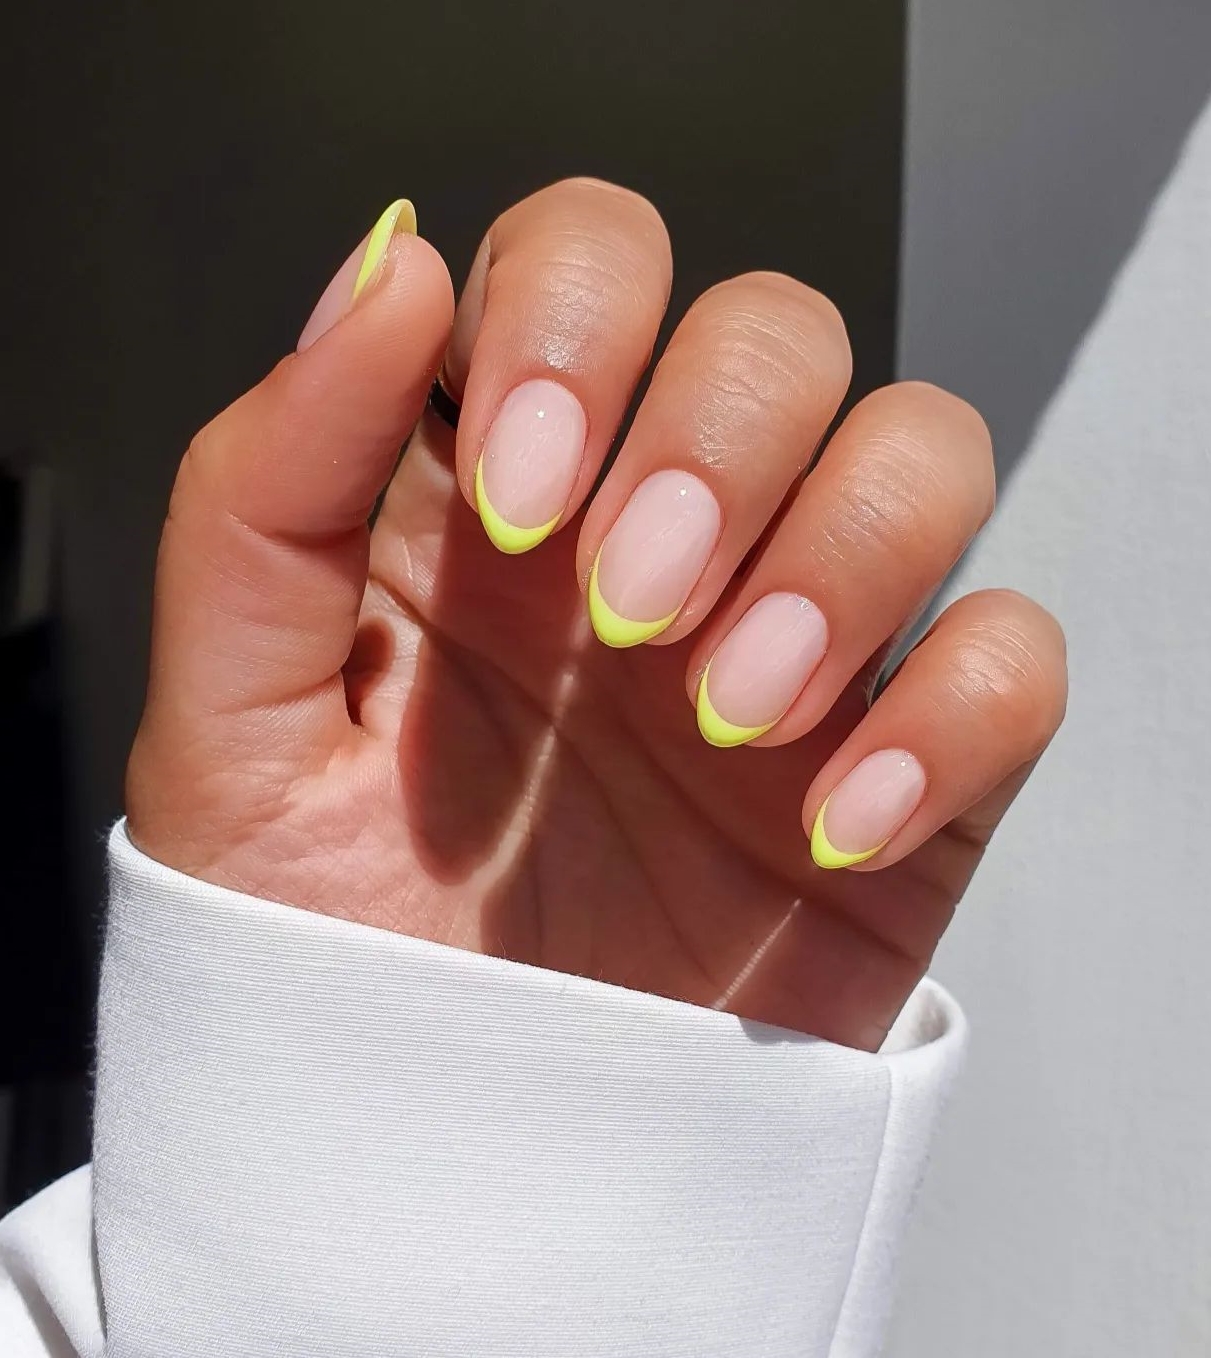 Short Almond Nails with Yellow French Tips